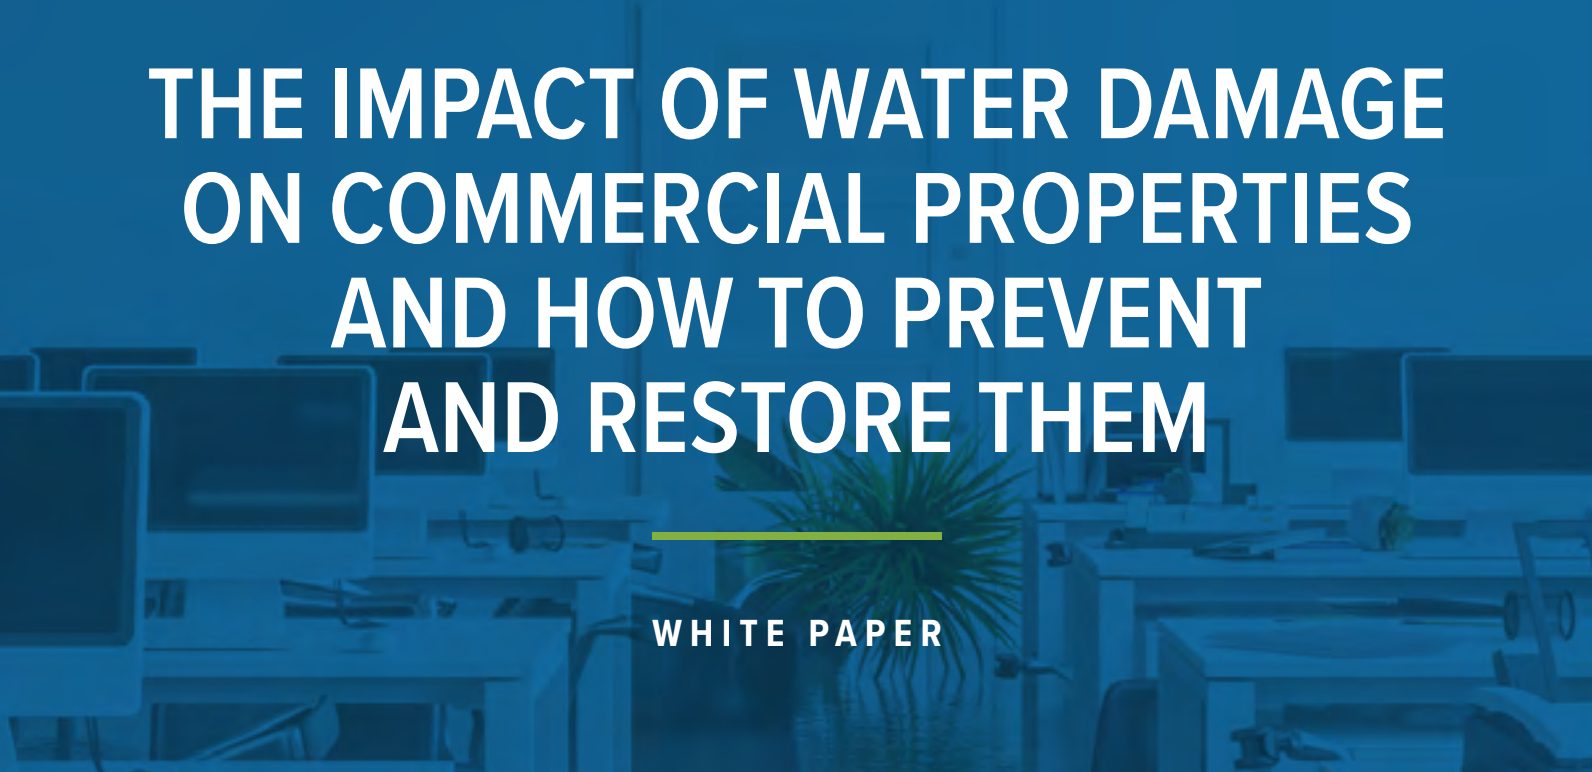 The impact of water damage on commercial properties and how to prevent and restore them